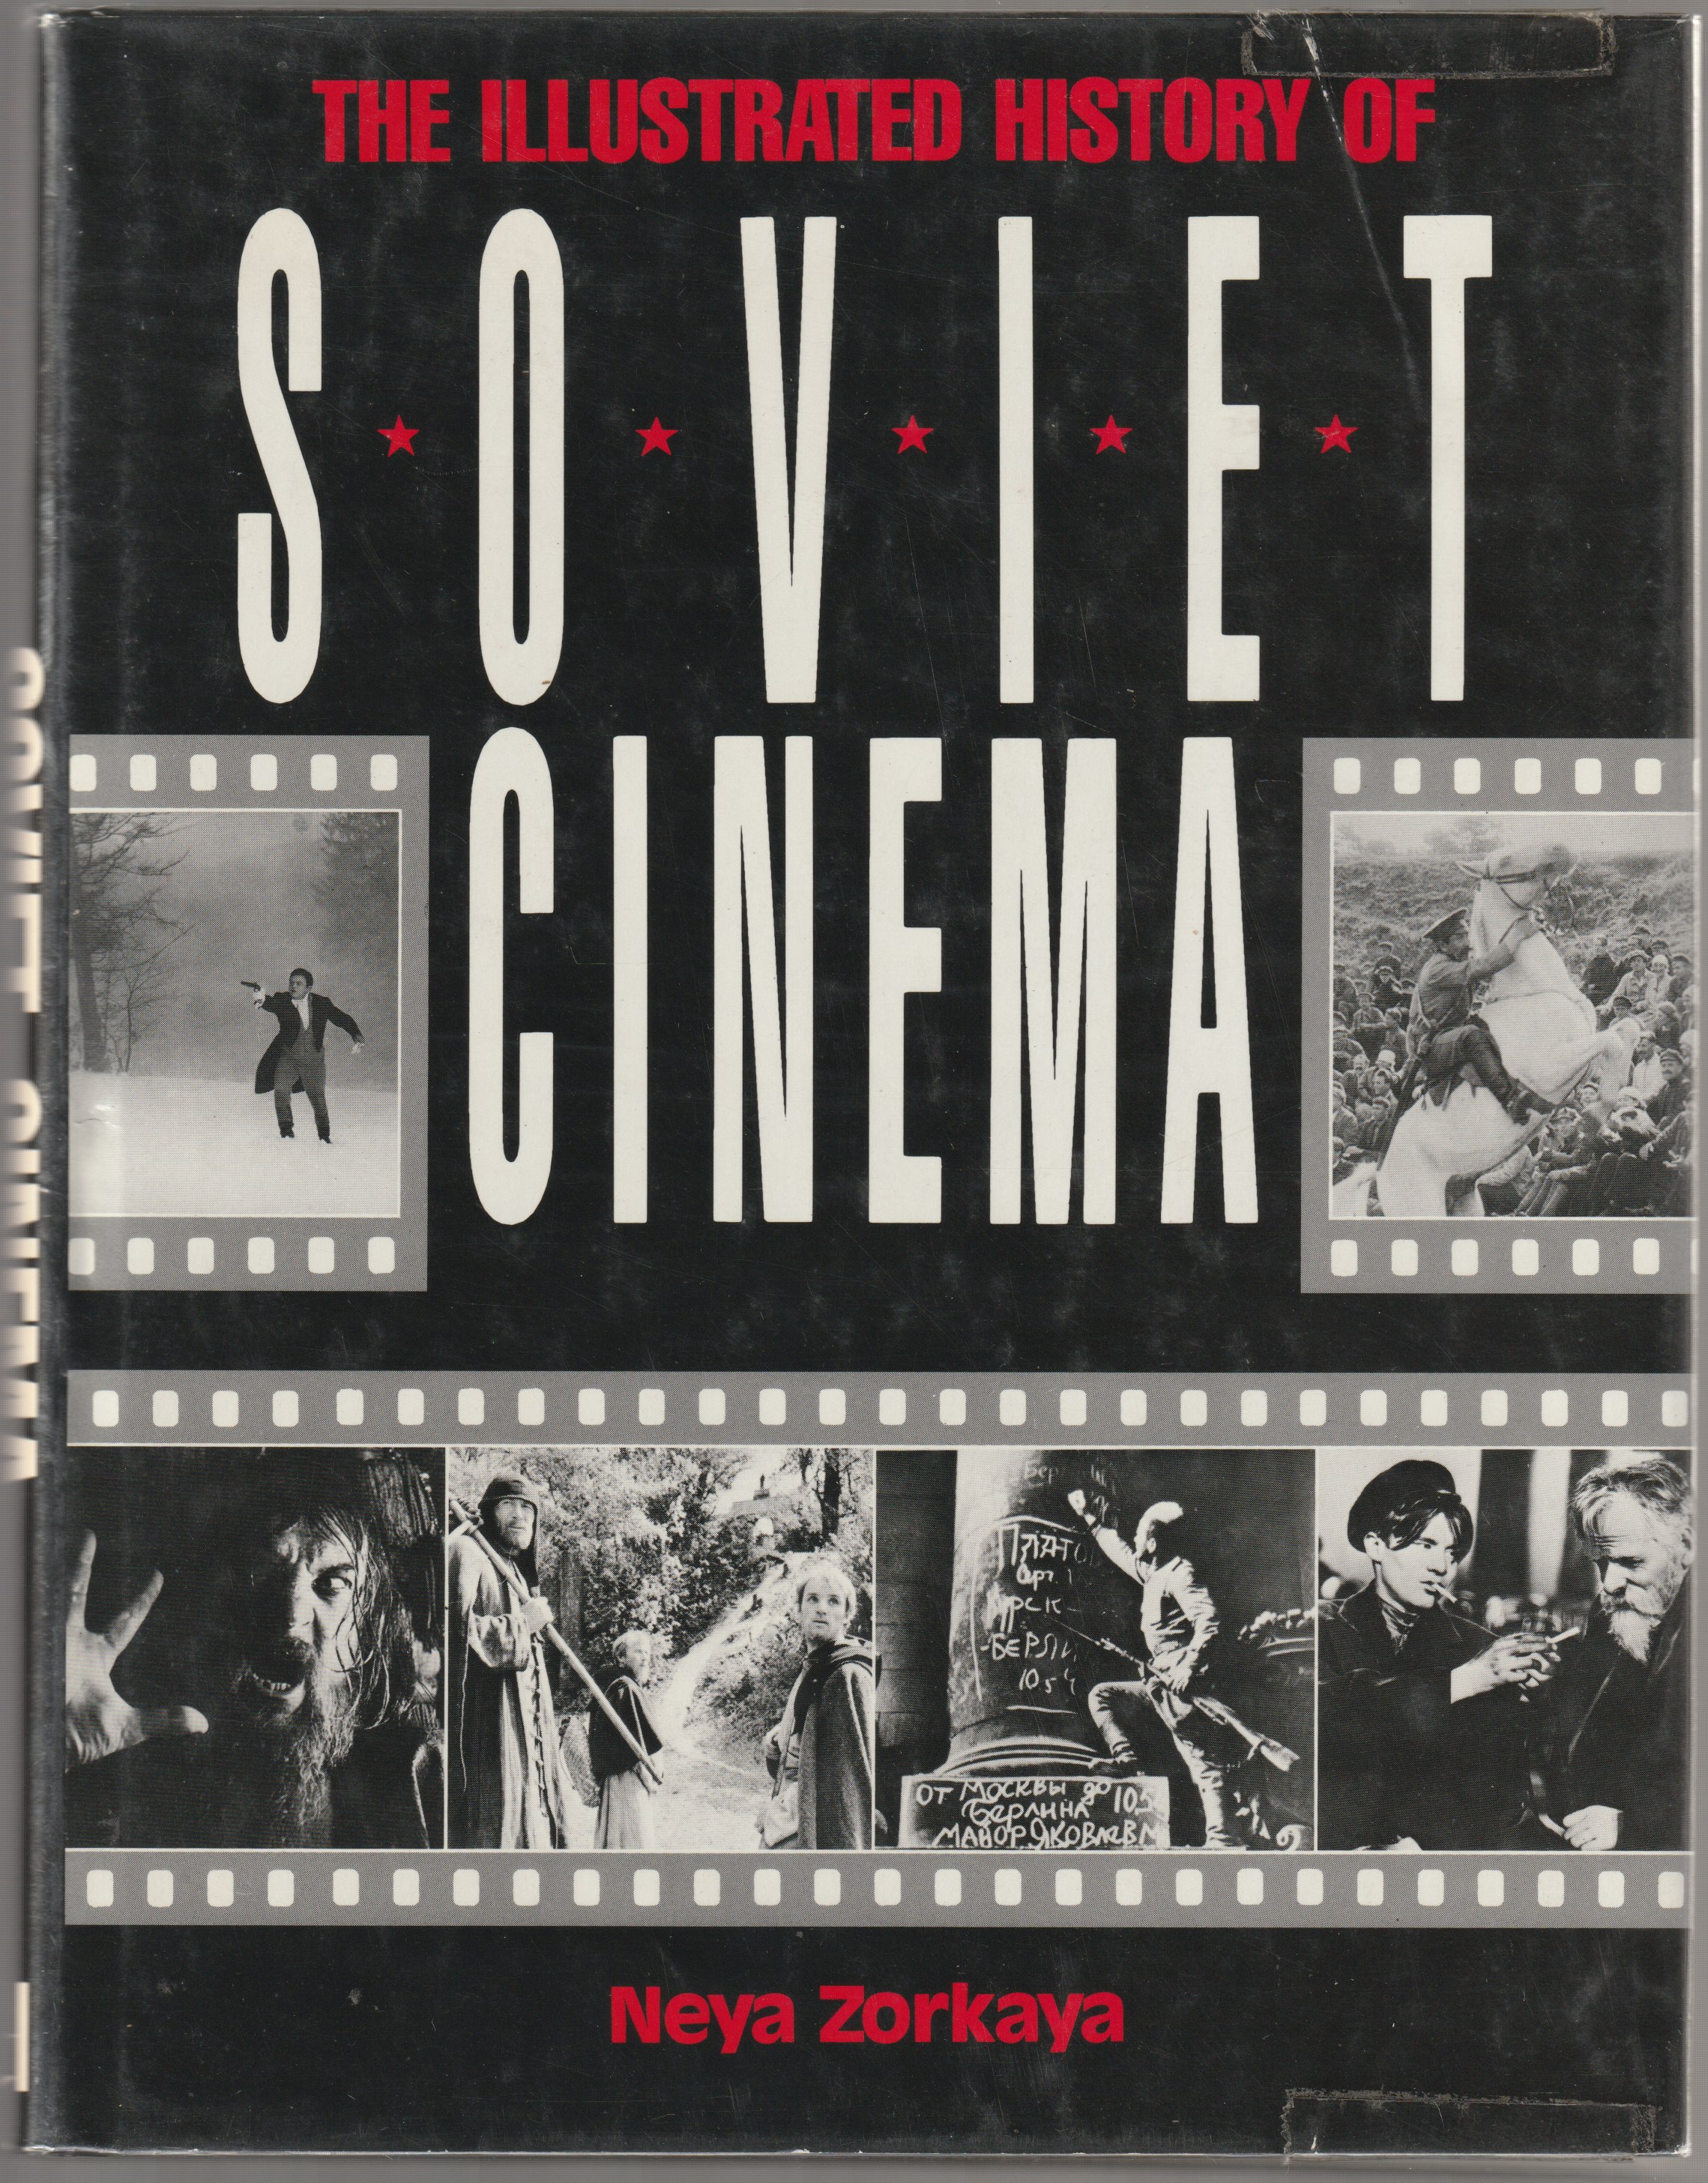 The illustrated history of the Soviet cinema